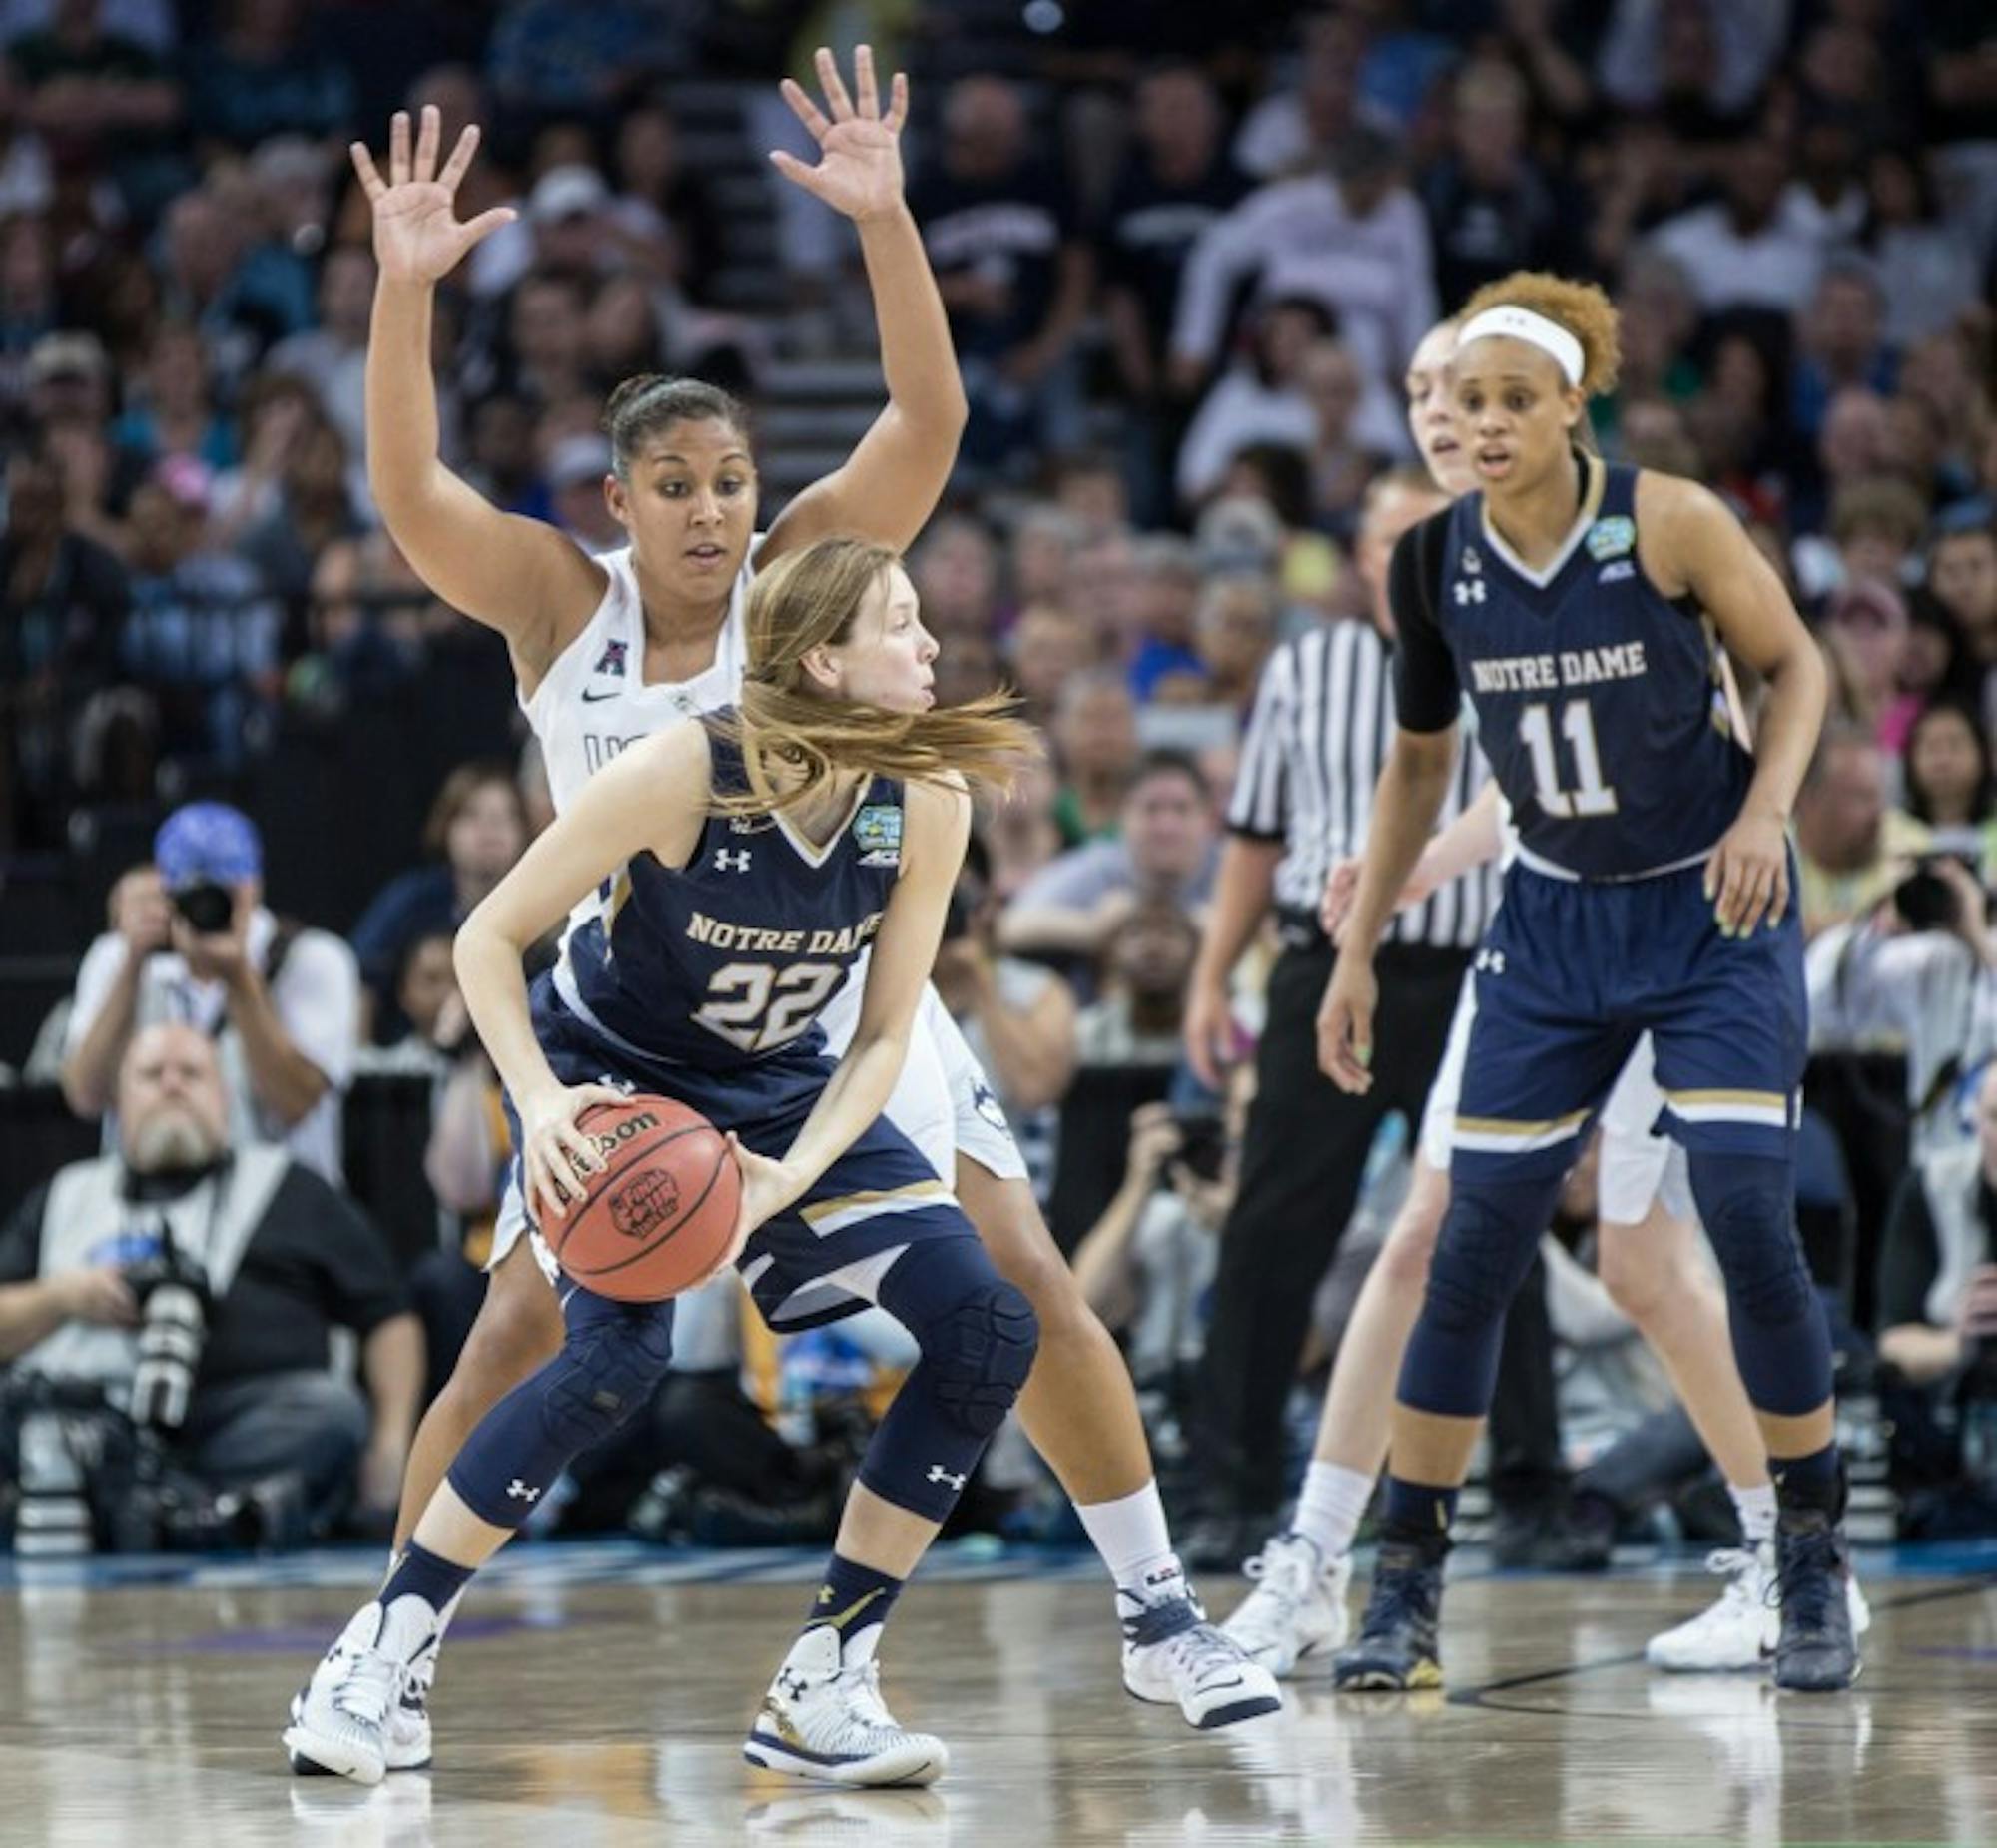 Graduate student guard Madison Cable looks to pass during Notre Dame’s 63-53 loss to Connecticut in the NCAA championship game in Tampa, Florida on April 7. Cable scored 12 points in Saturday’s win.